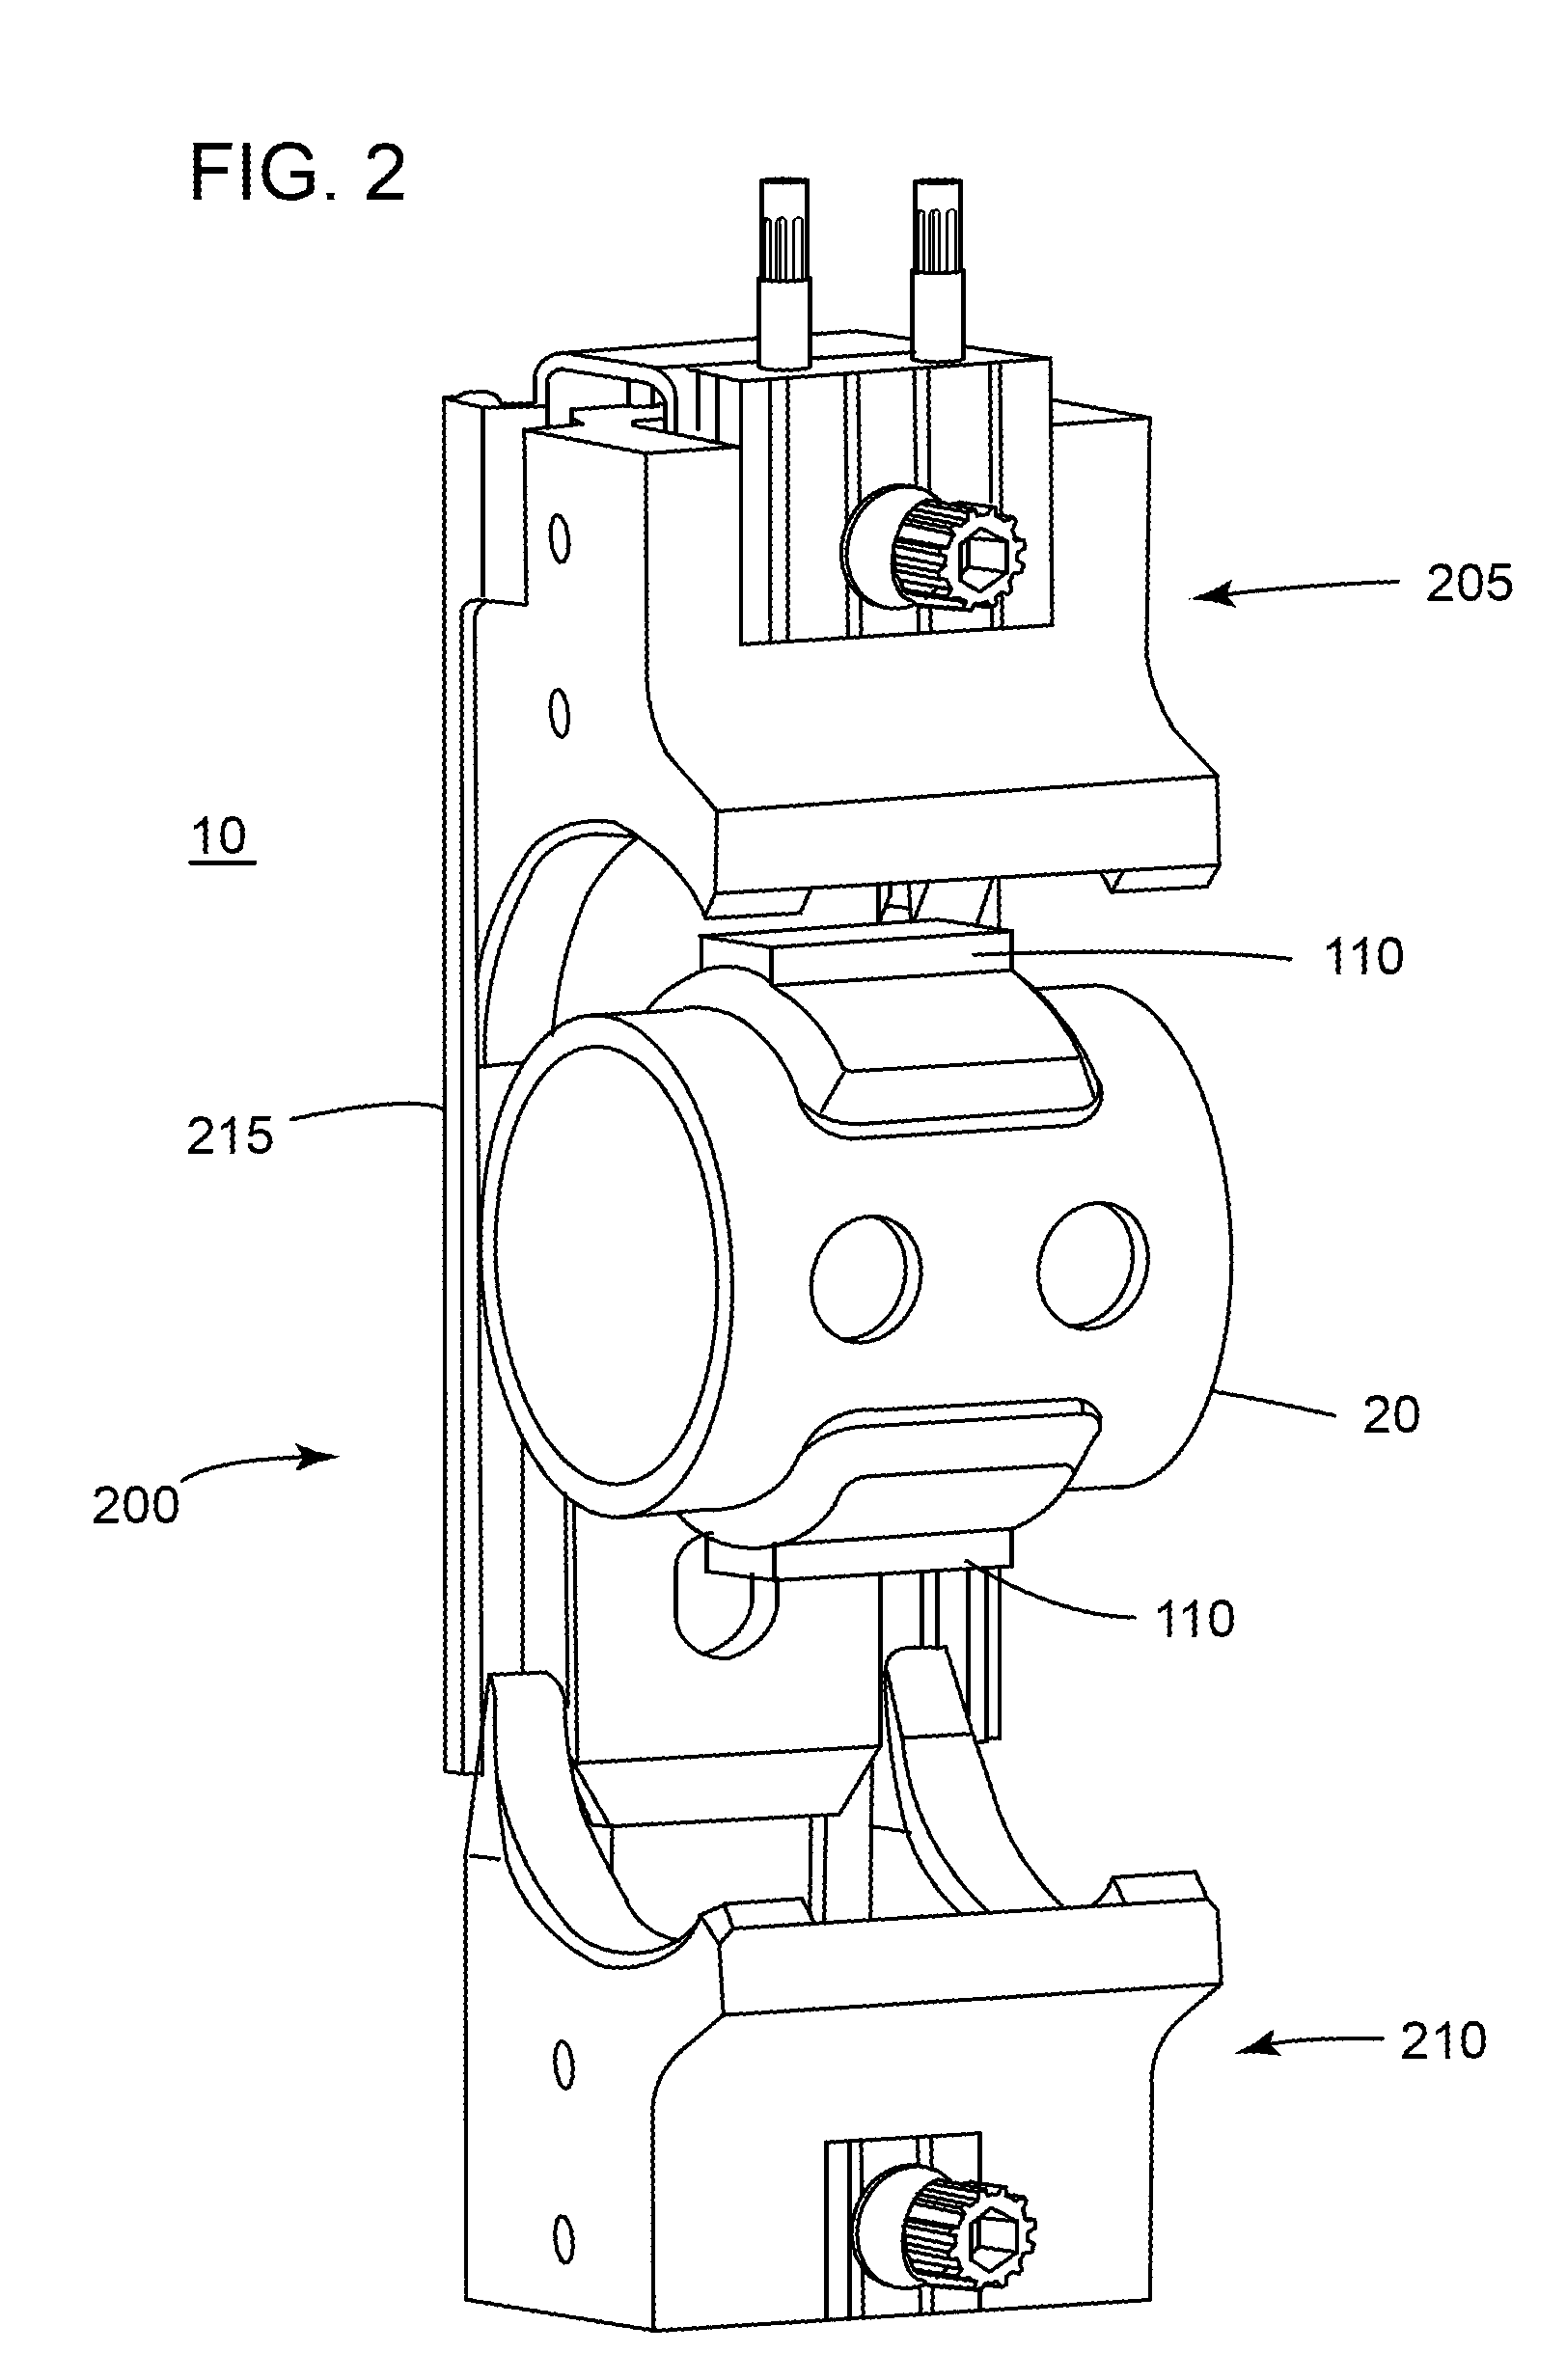 Apparatus and system for dampening the vibration experienced by an object